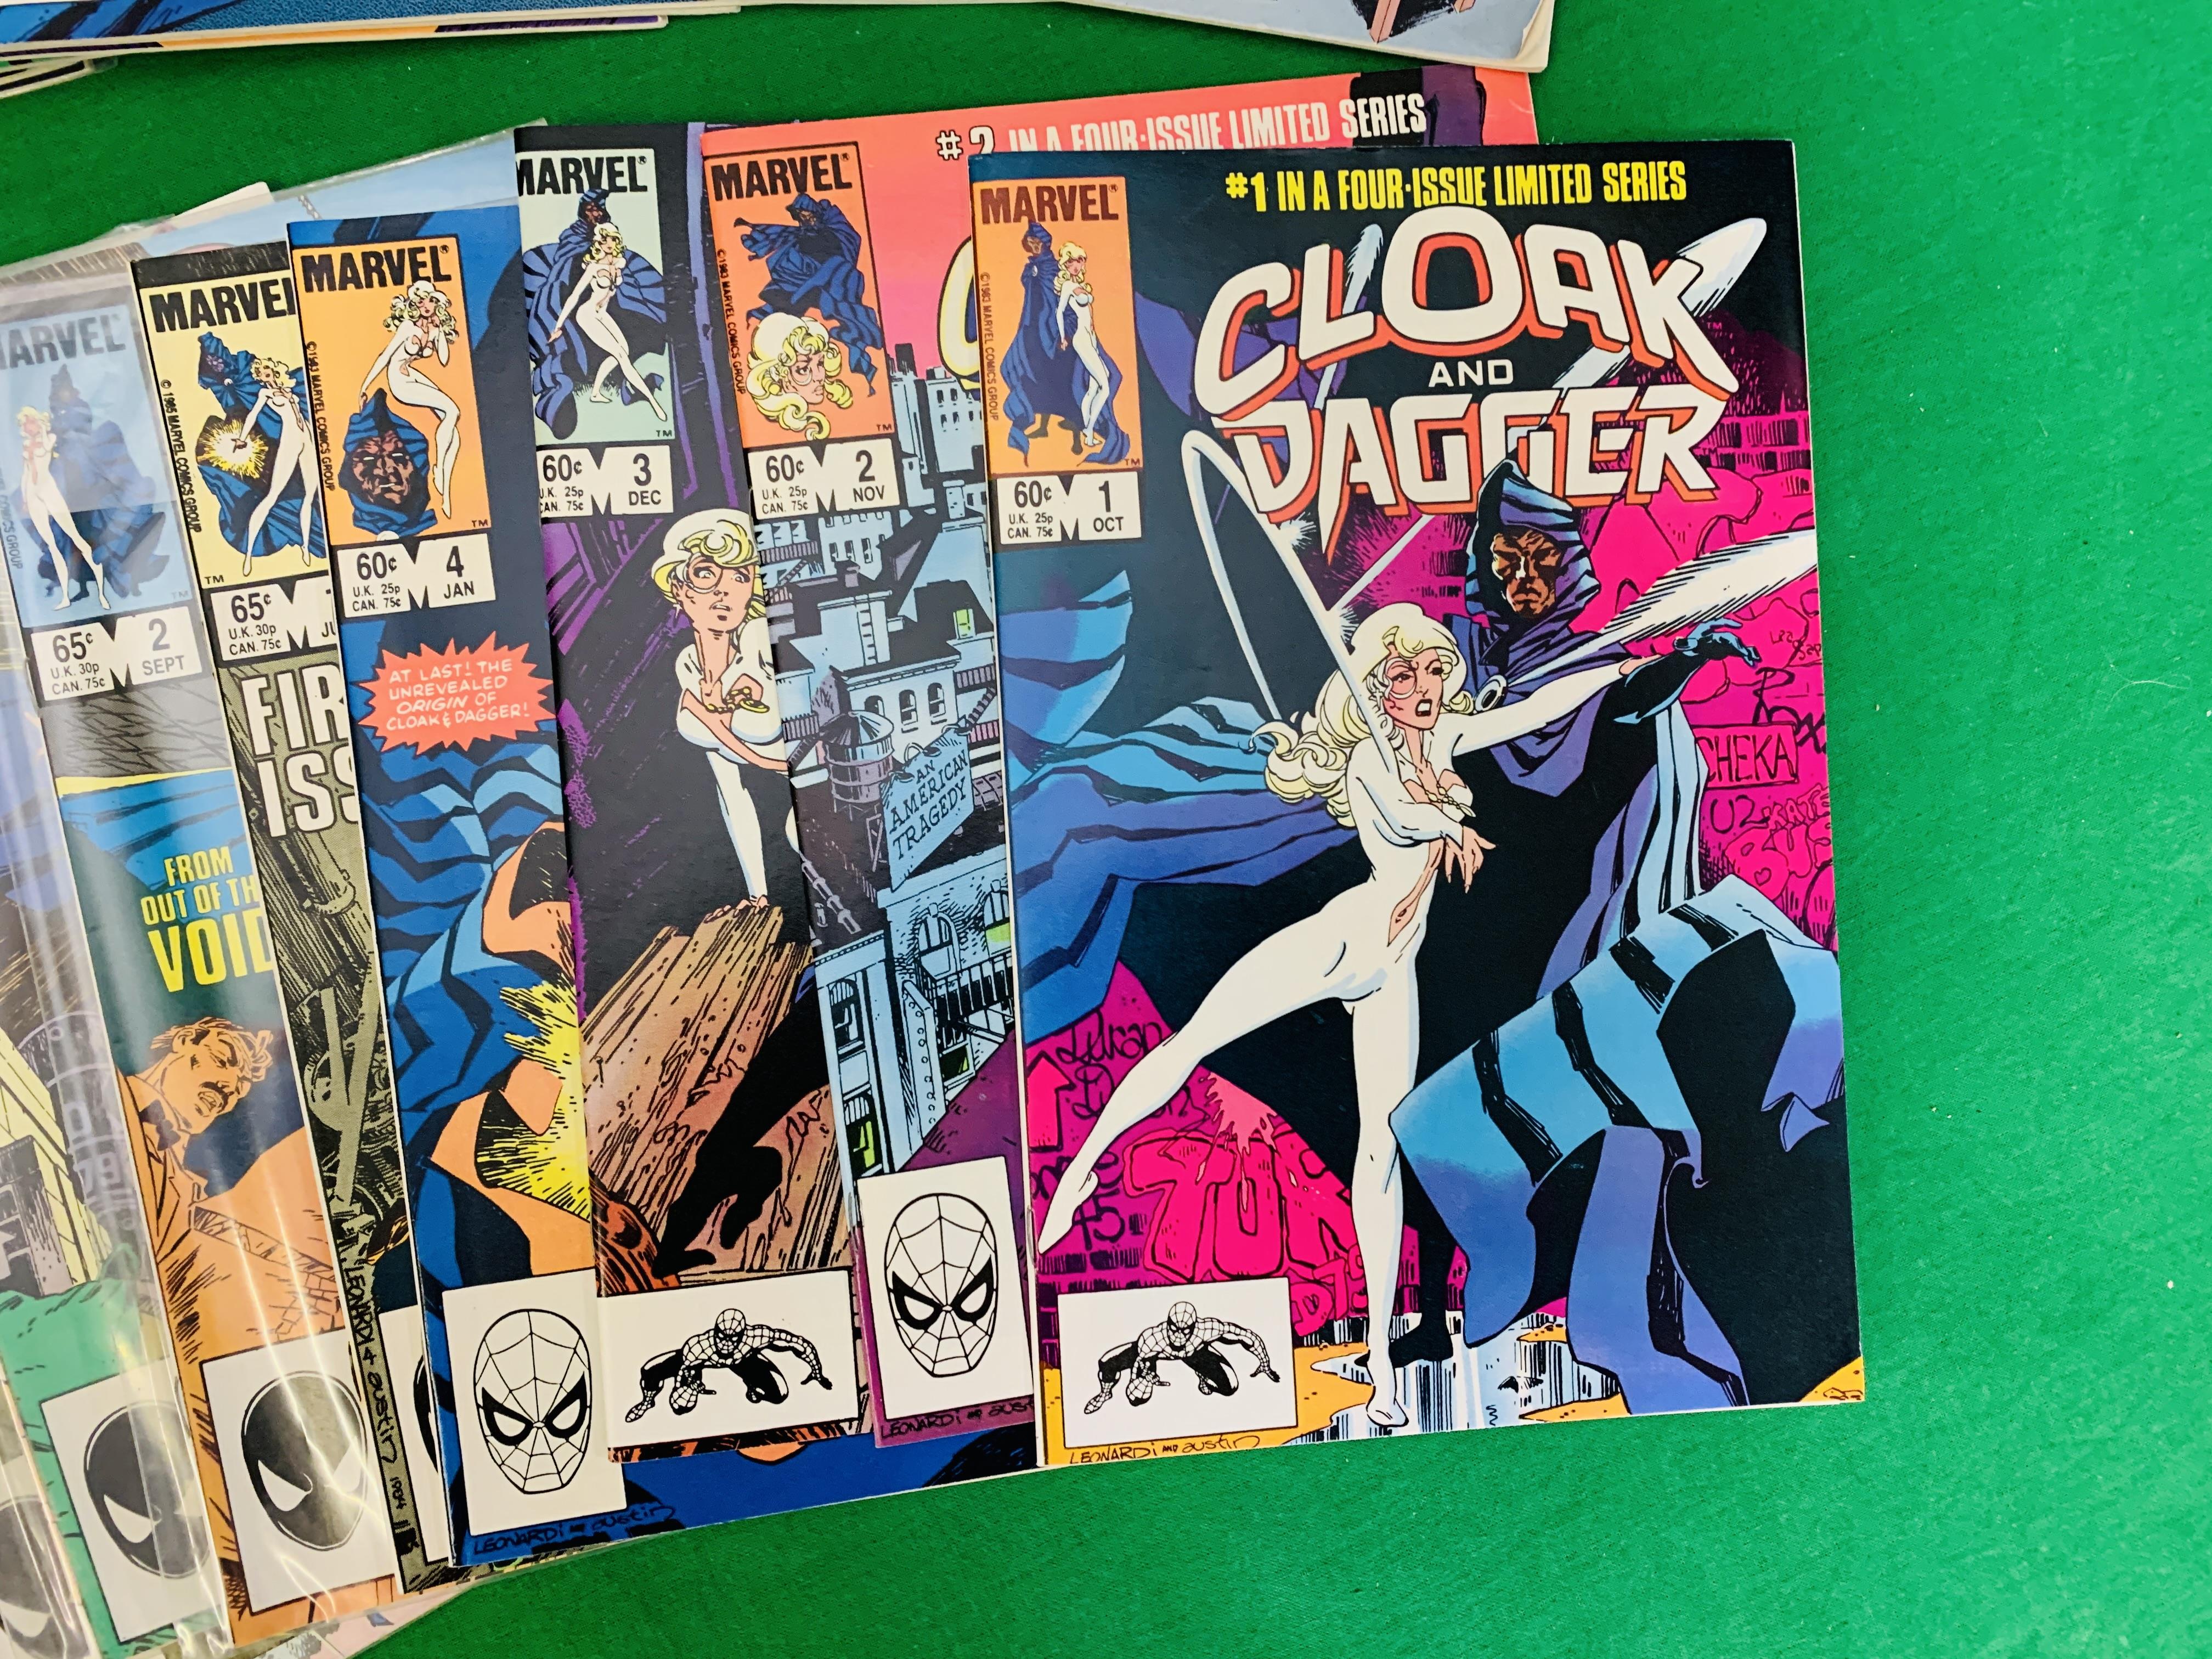 MARVEL COMICS CLOAK AND DAGGER NO. 1 - 4 FROM 1983, NO. 1 - 11 FROM 1985, NO. 1 - 19 FROM 1988. - Image 4 of 7